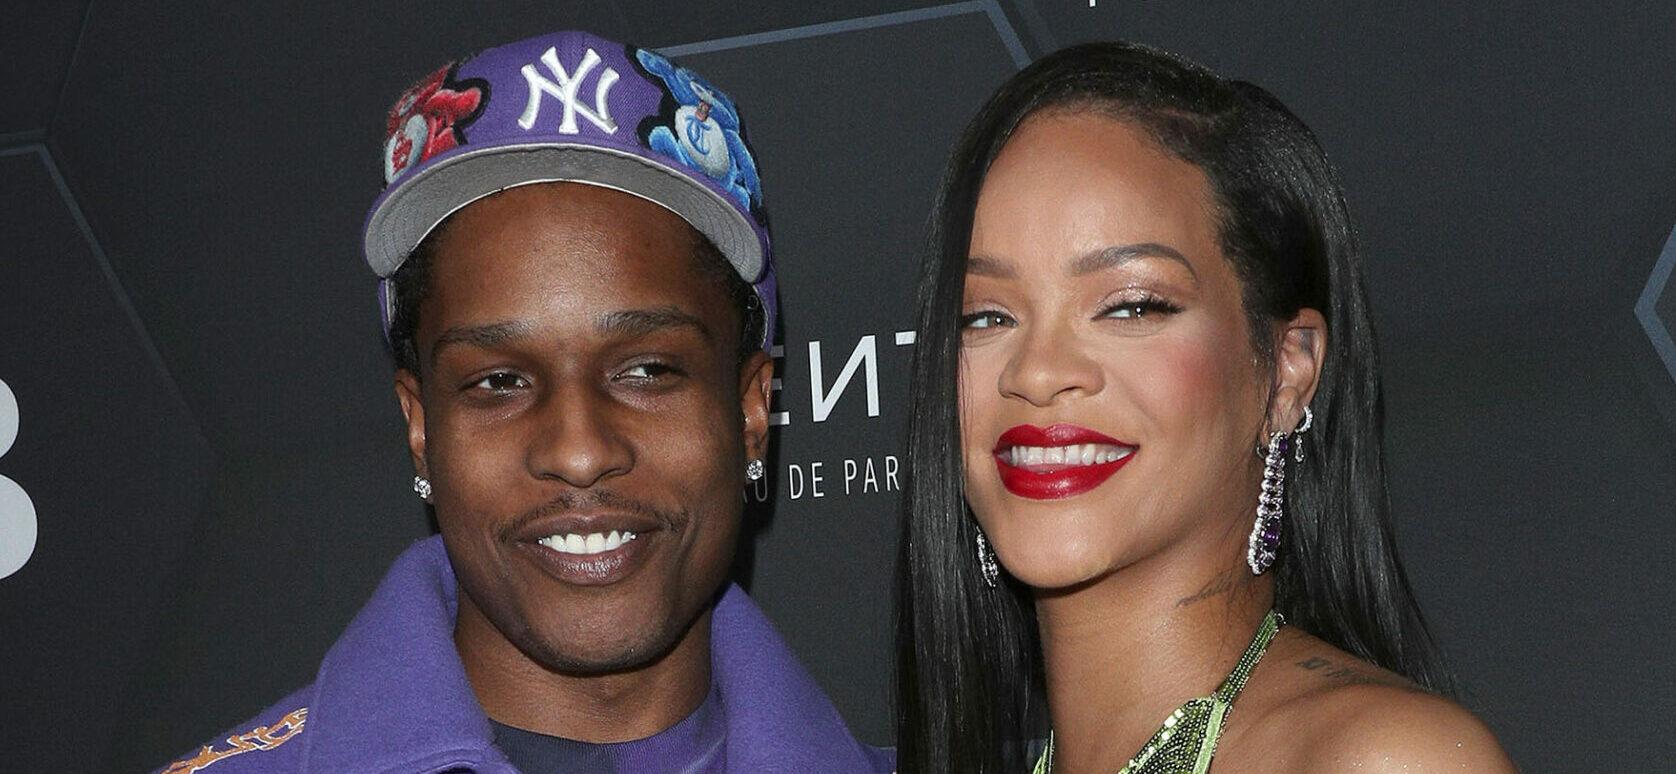 A$AP Rocky Gushes About GF Rihanna’s Return To Music: ‘I’m Super Excited’